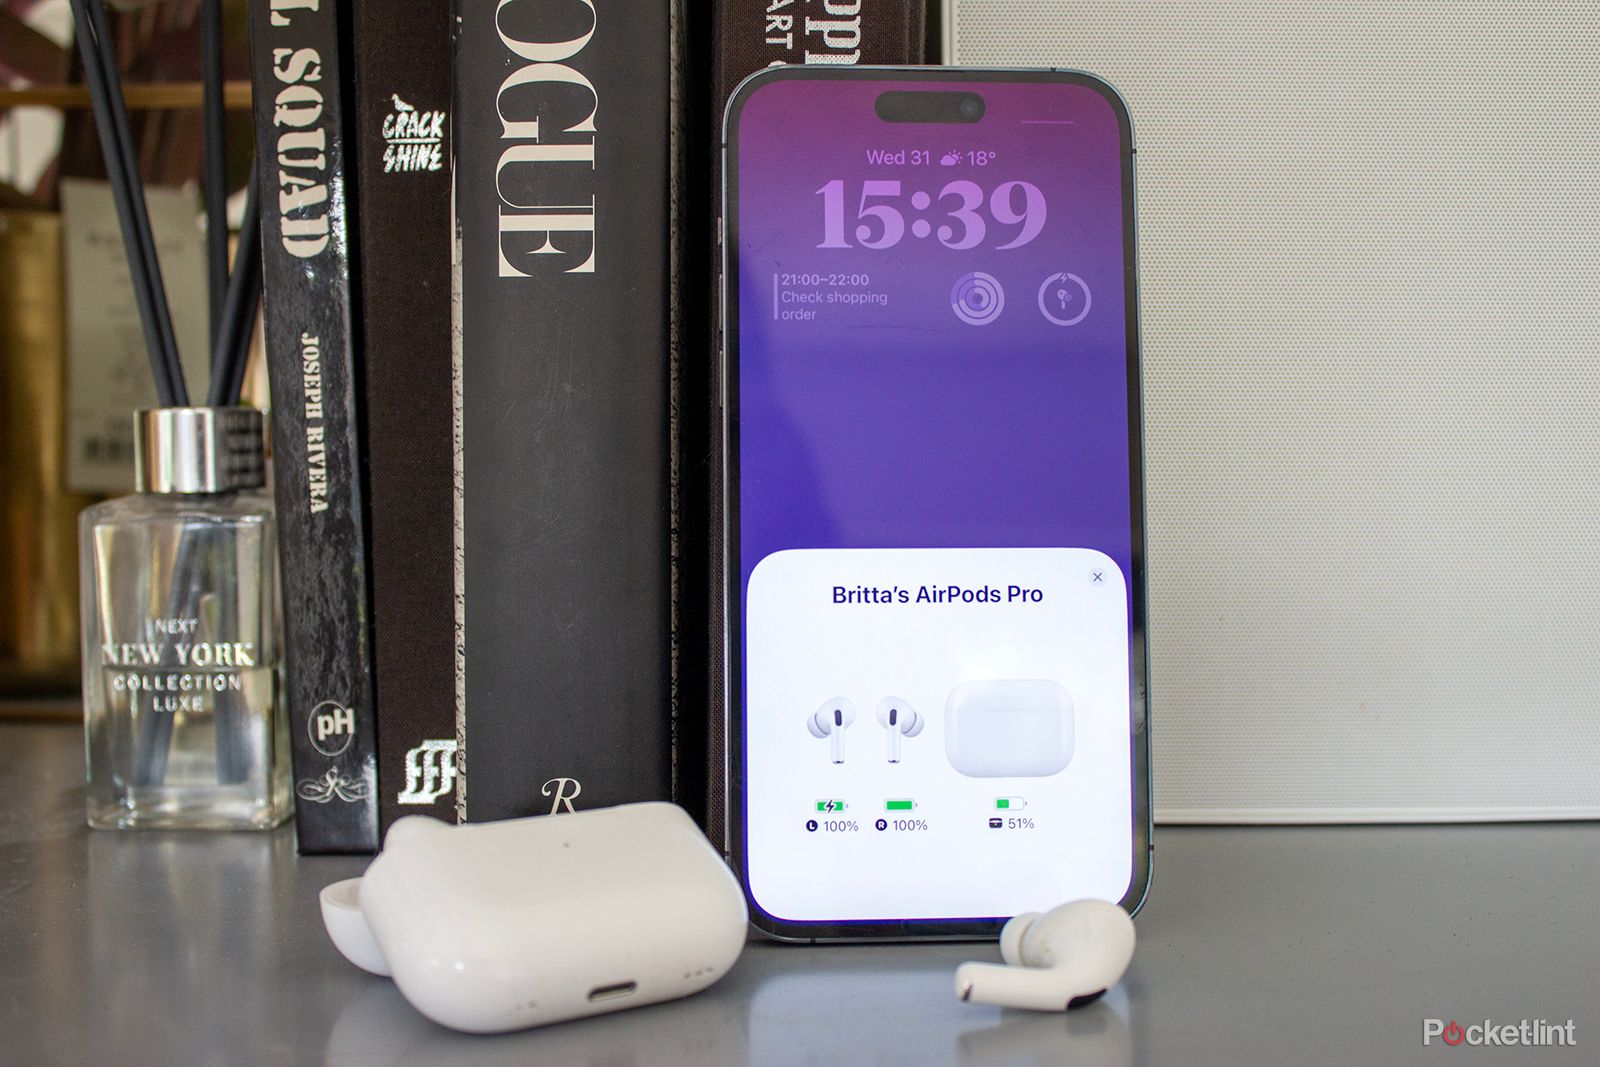 Apple AirPods tips and tricks: How to get the most out of Apple